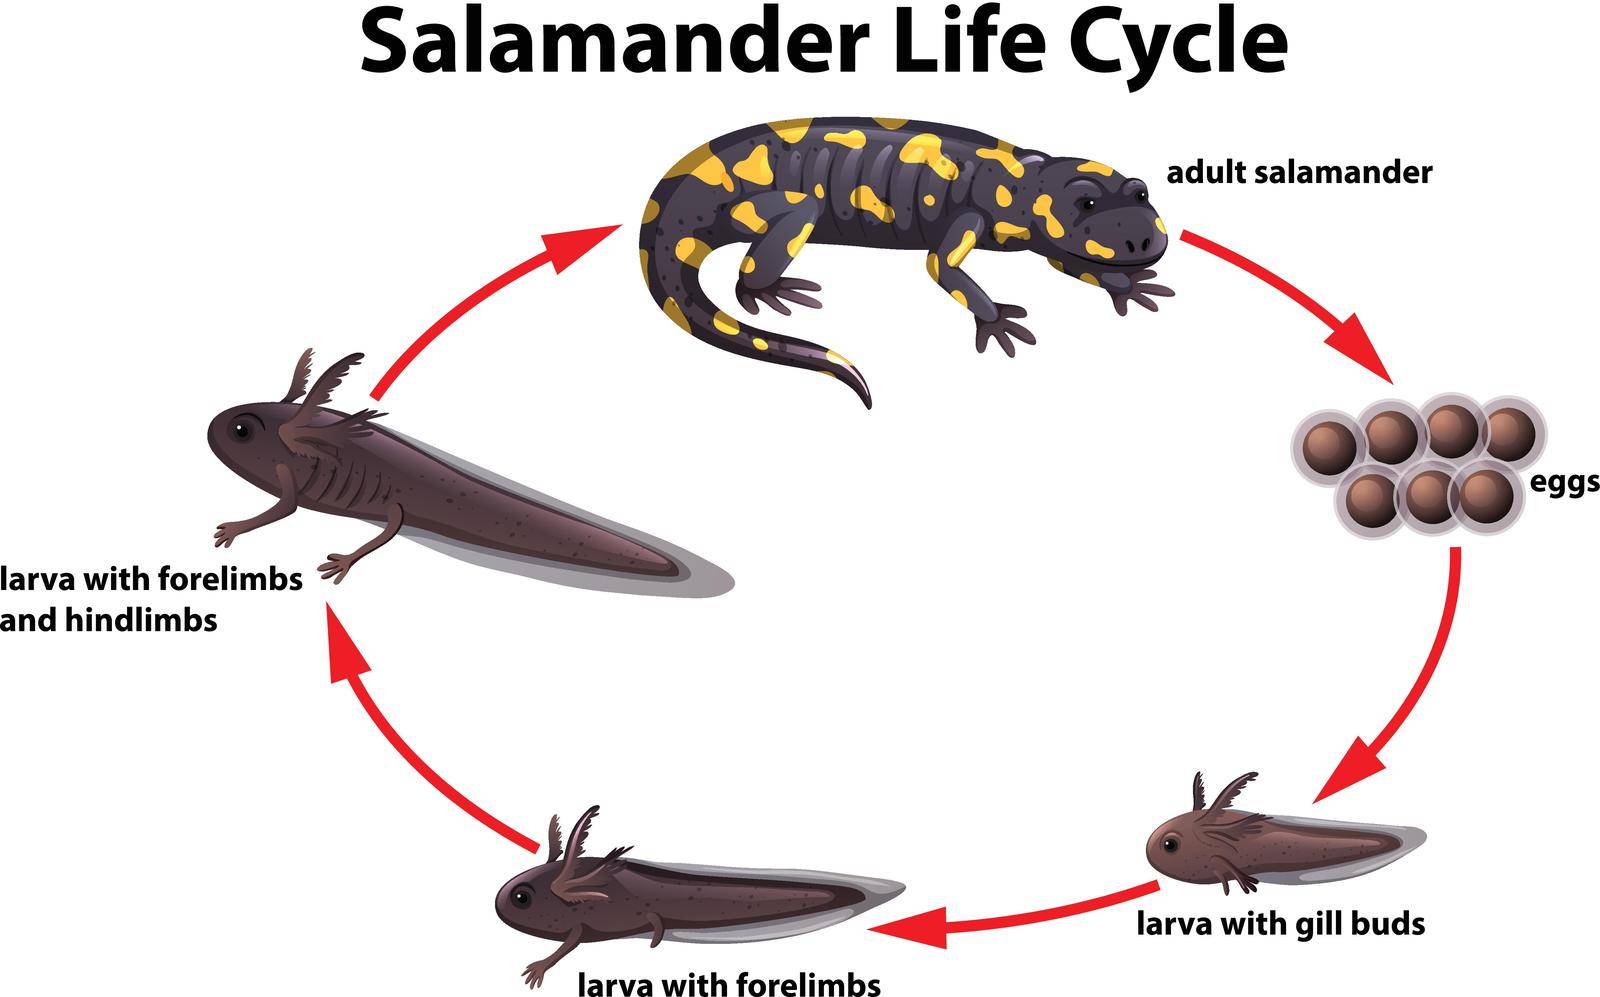 Salamander life cycle concept by iimages